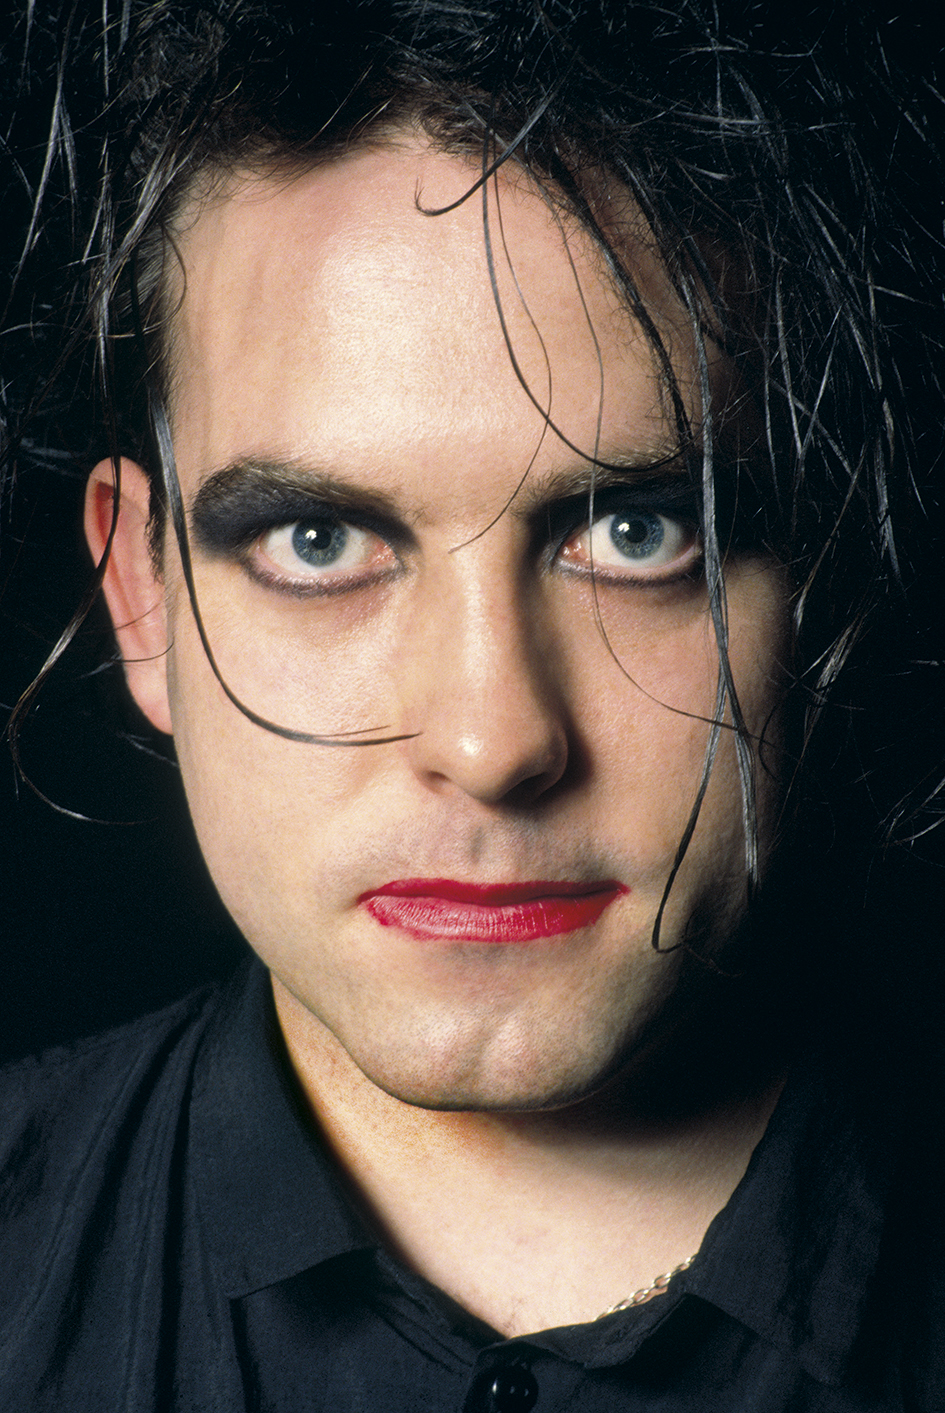 Robert Smith of The Cure looks directly at the camera